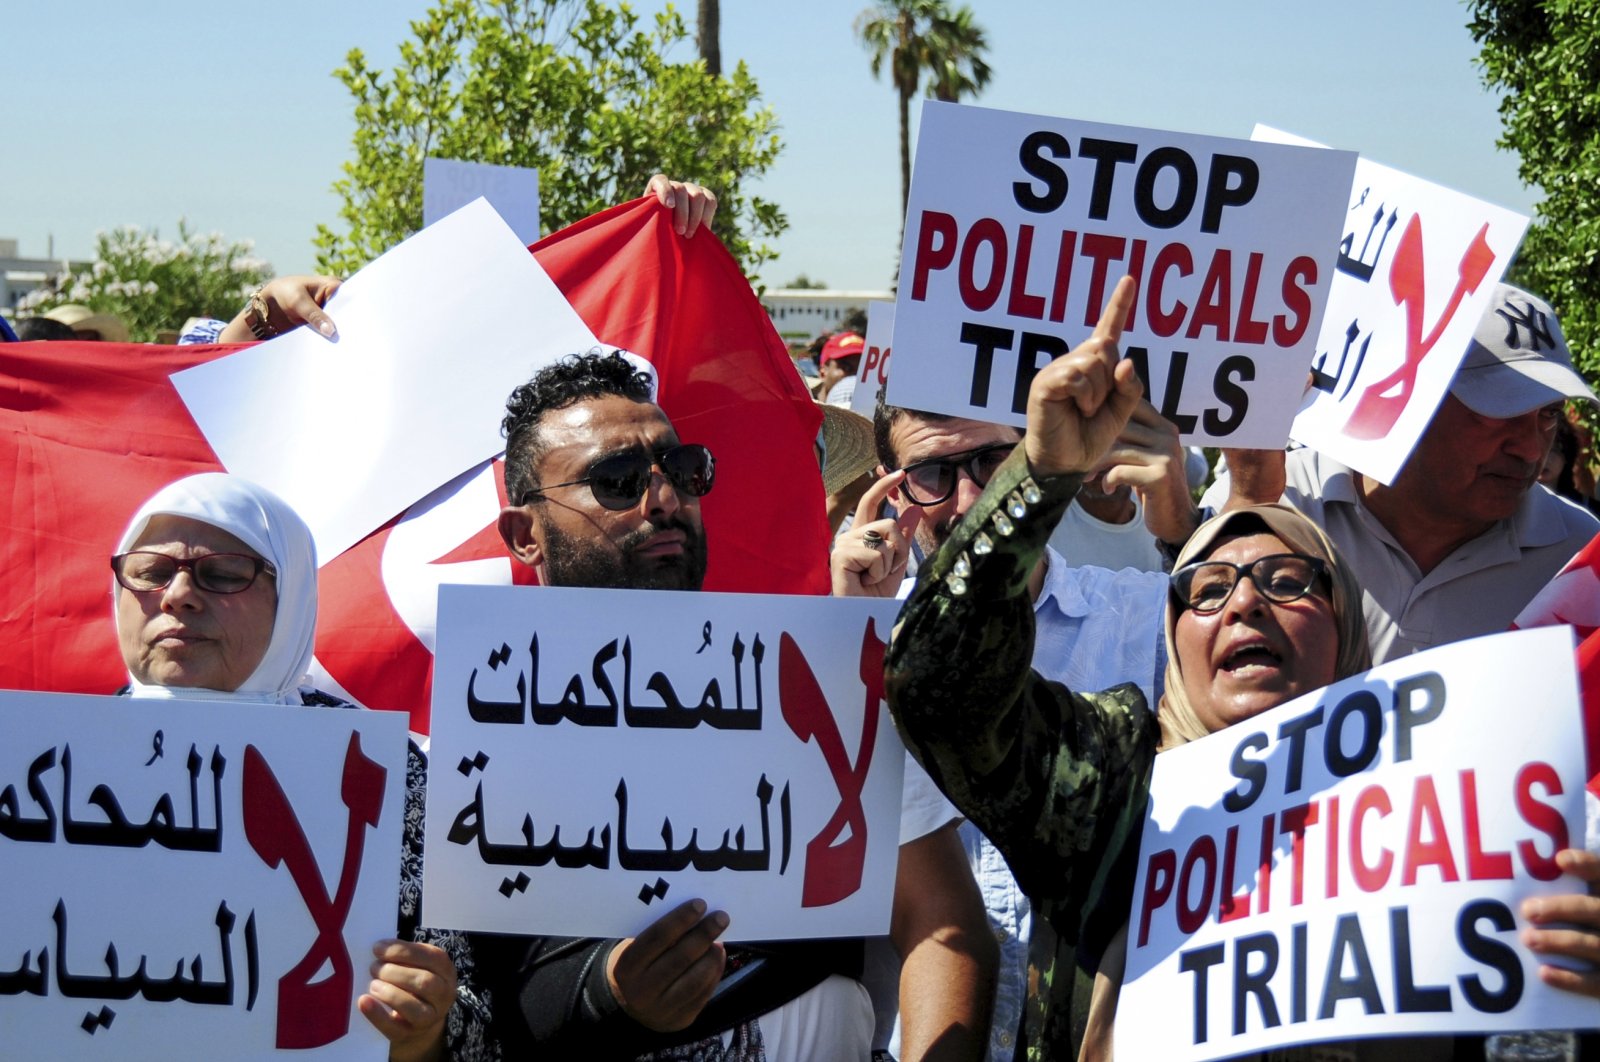 Supporter of Ennahdha party leader Rached Ghannouchi protest in Tunis, Tunisia, July 19, 2022. (AP Photo)